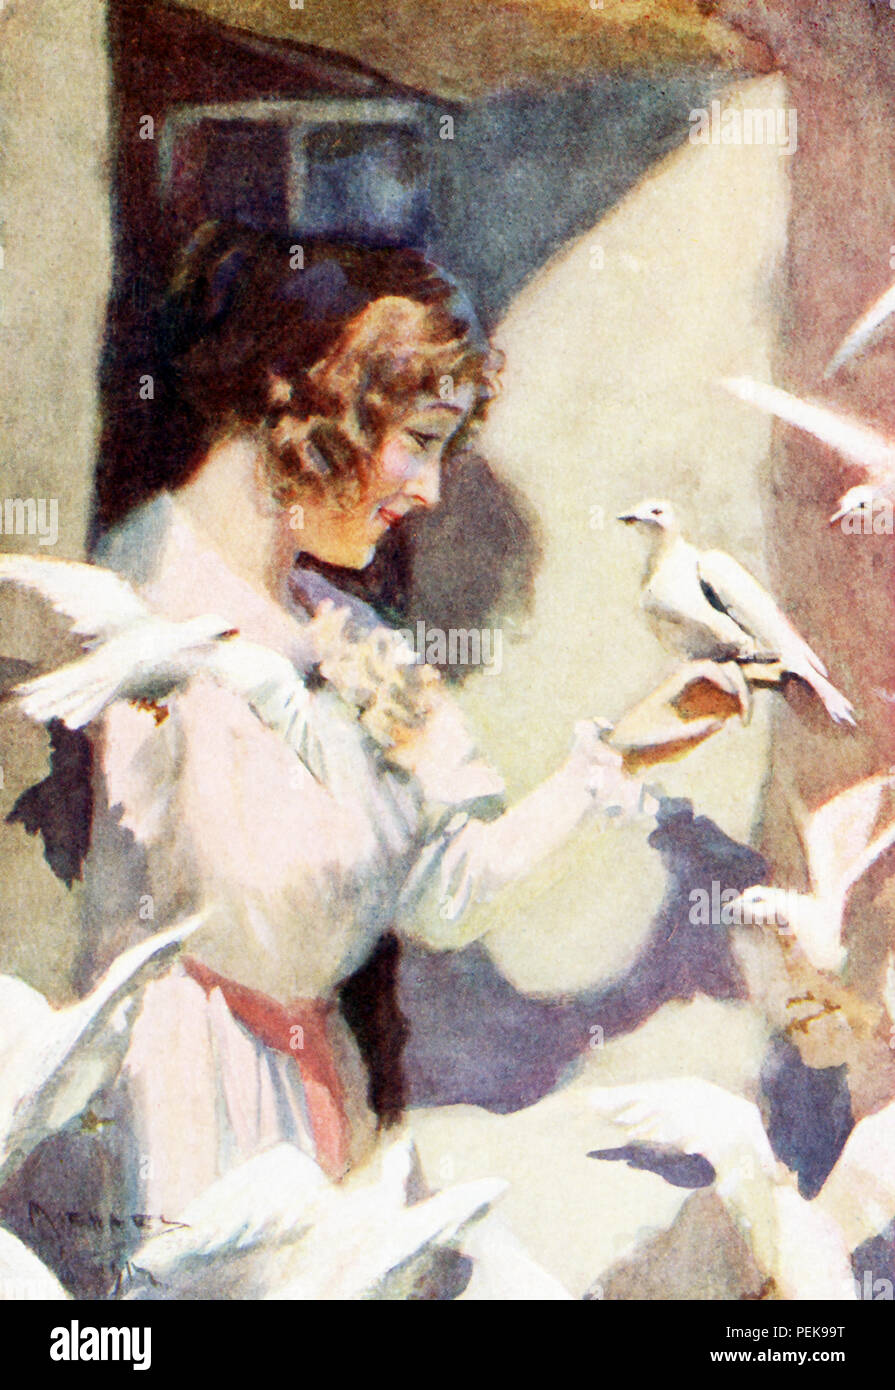 This illustration dates to the early 1900s and shows Hilda with doves, The tale of Hilda is found in Nathaniel Hawthorne's The Marble Faun, also known as The Romance of Monte Beni. The caption reads: They soon became familiar with the fairhaired Saxon girl as if she were a born sister of their brood. - Transformation. Nathaniel Hawthorne (1804-1864) was an American novelist and short story writer. His Wonder-Book and Tanglewood Tales are children’s classics. He also wrote The Scarlet Letter, Blithedale Romance, The House of Seven Gables, The Marble Faun. With his superb creation of dark-hued a Stock Photo